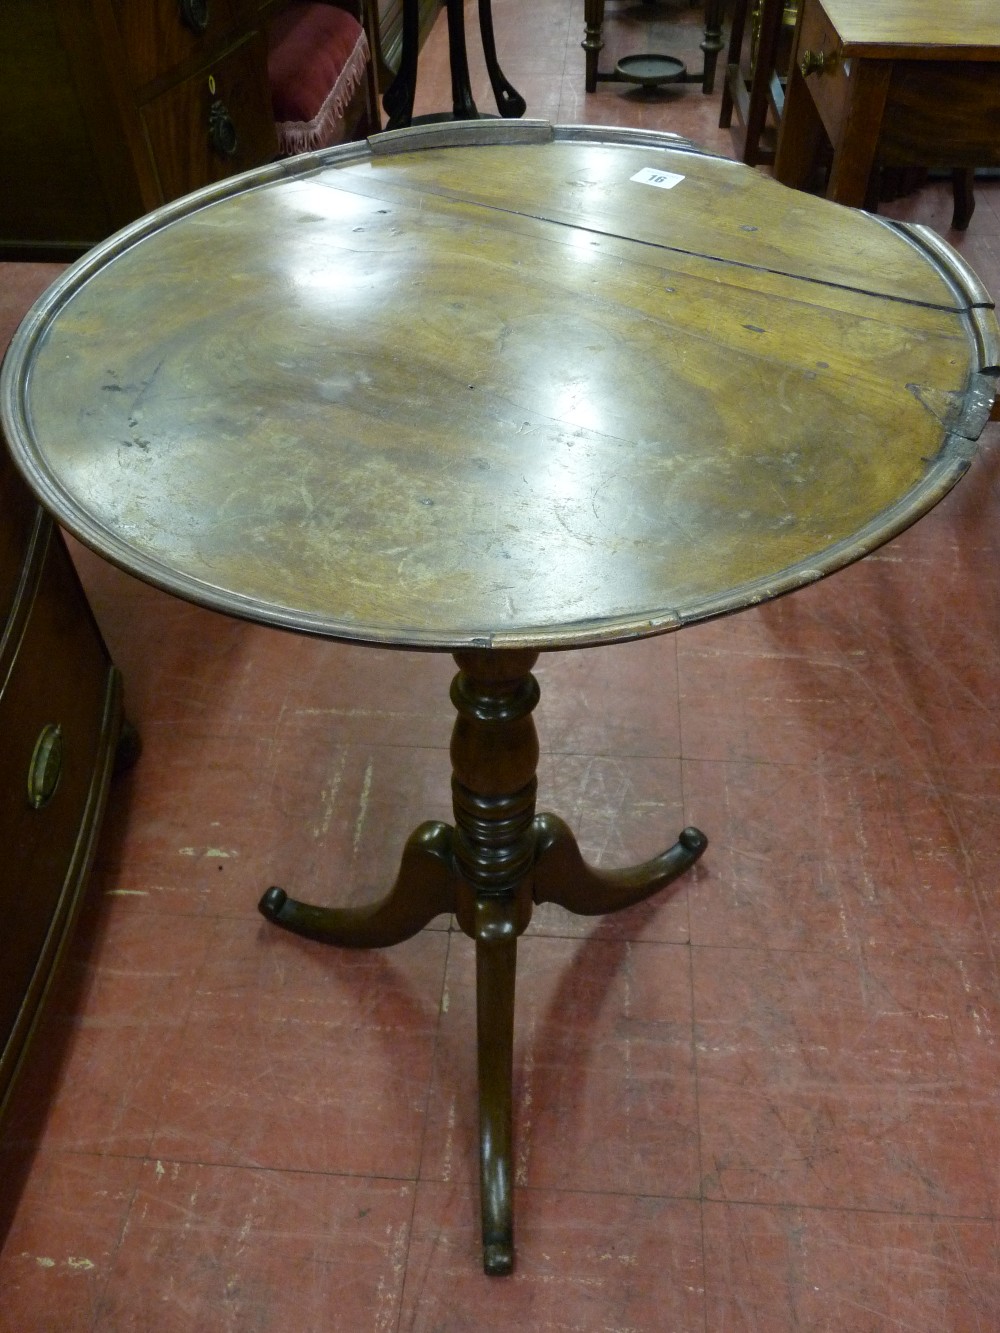 A GEORGIAN MAHOGANY TILT TOP TABLE, the tray top on a turned column with tripod base (splits and